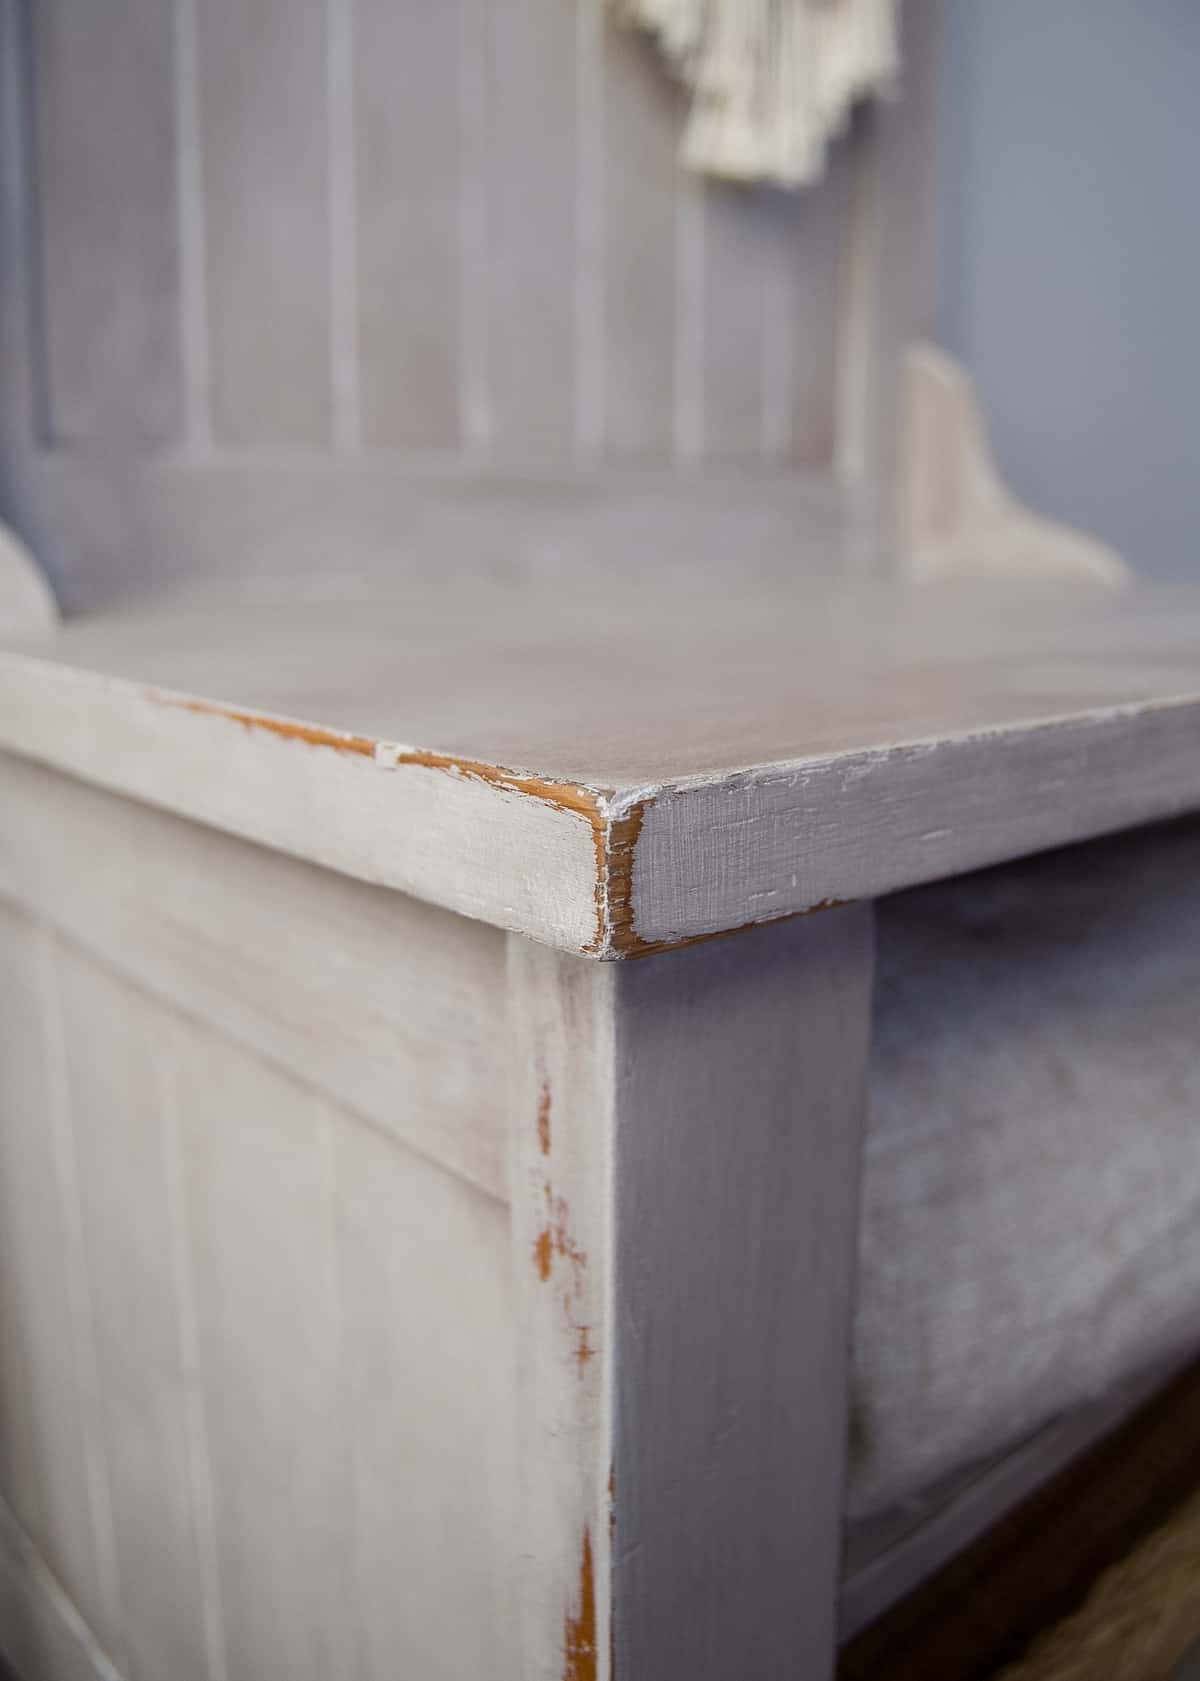 How to use dark antique wax to create a white wash effect #DIY #furniturepaint #paintedfurniture #whitewash #fauxfinish #chalkpaint #antiquingwax #rustic #entryway #coathook #countrychicpaint - blog.countrychicpaint.com